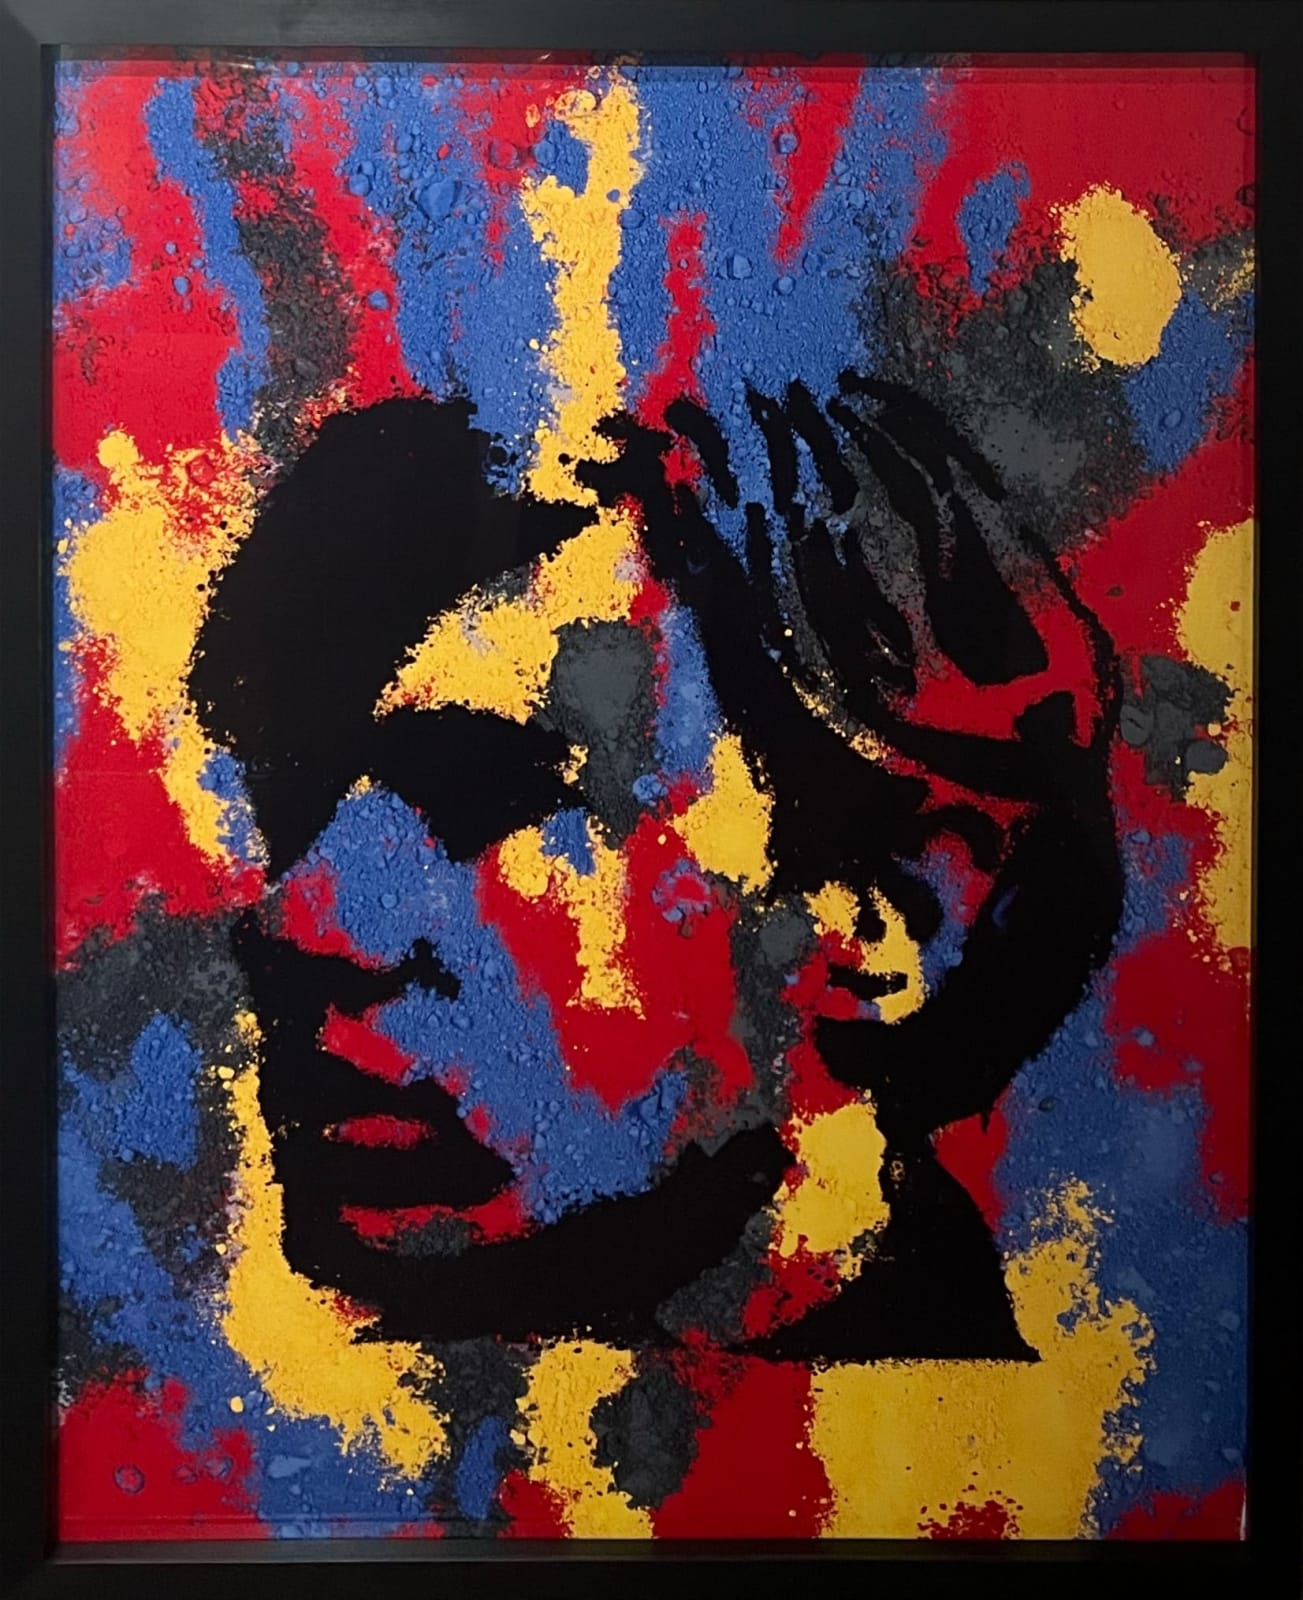 Screen print portrait of Andy Warhol made out of red, yellow, blue and black paint pigment by Vik Muniz